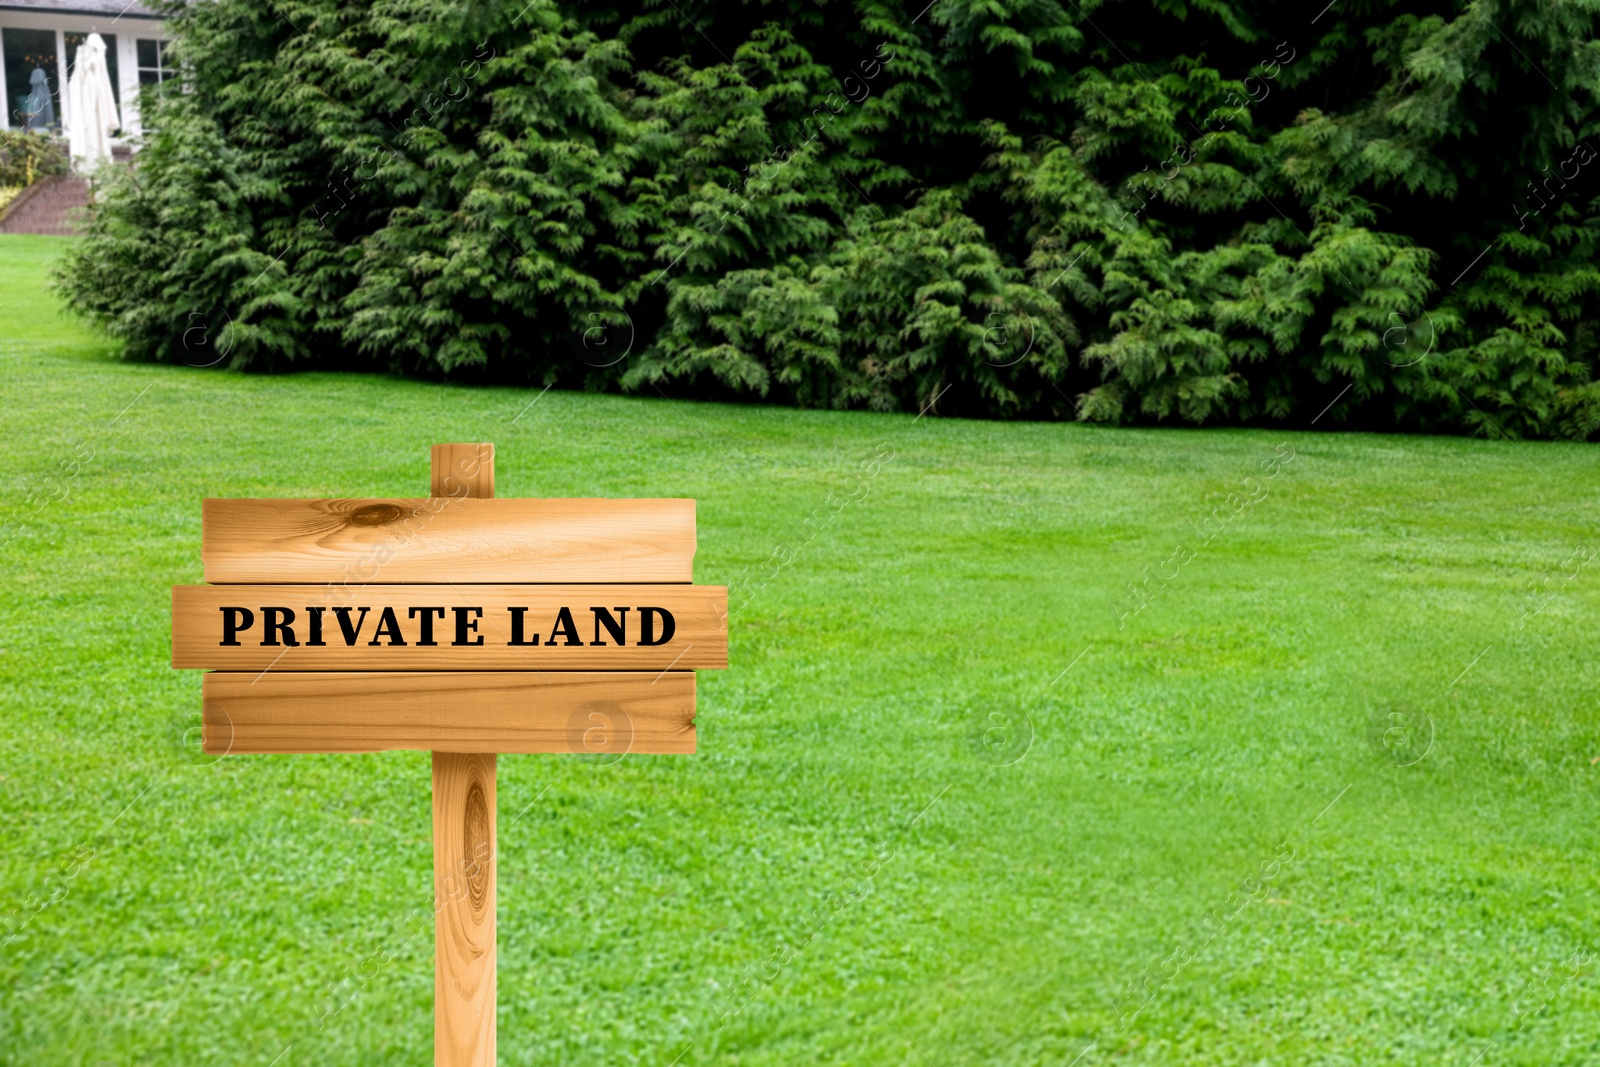 Image of Wooden sign with text Private Land on green lawn